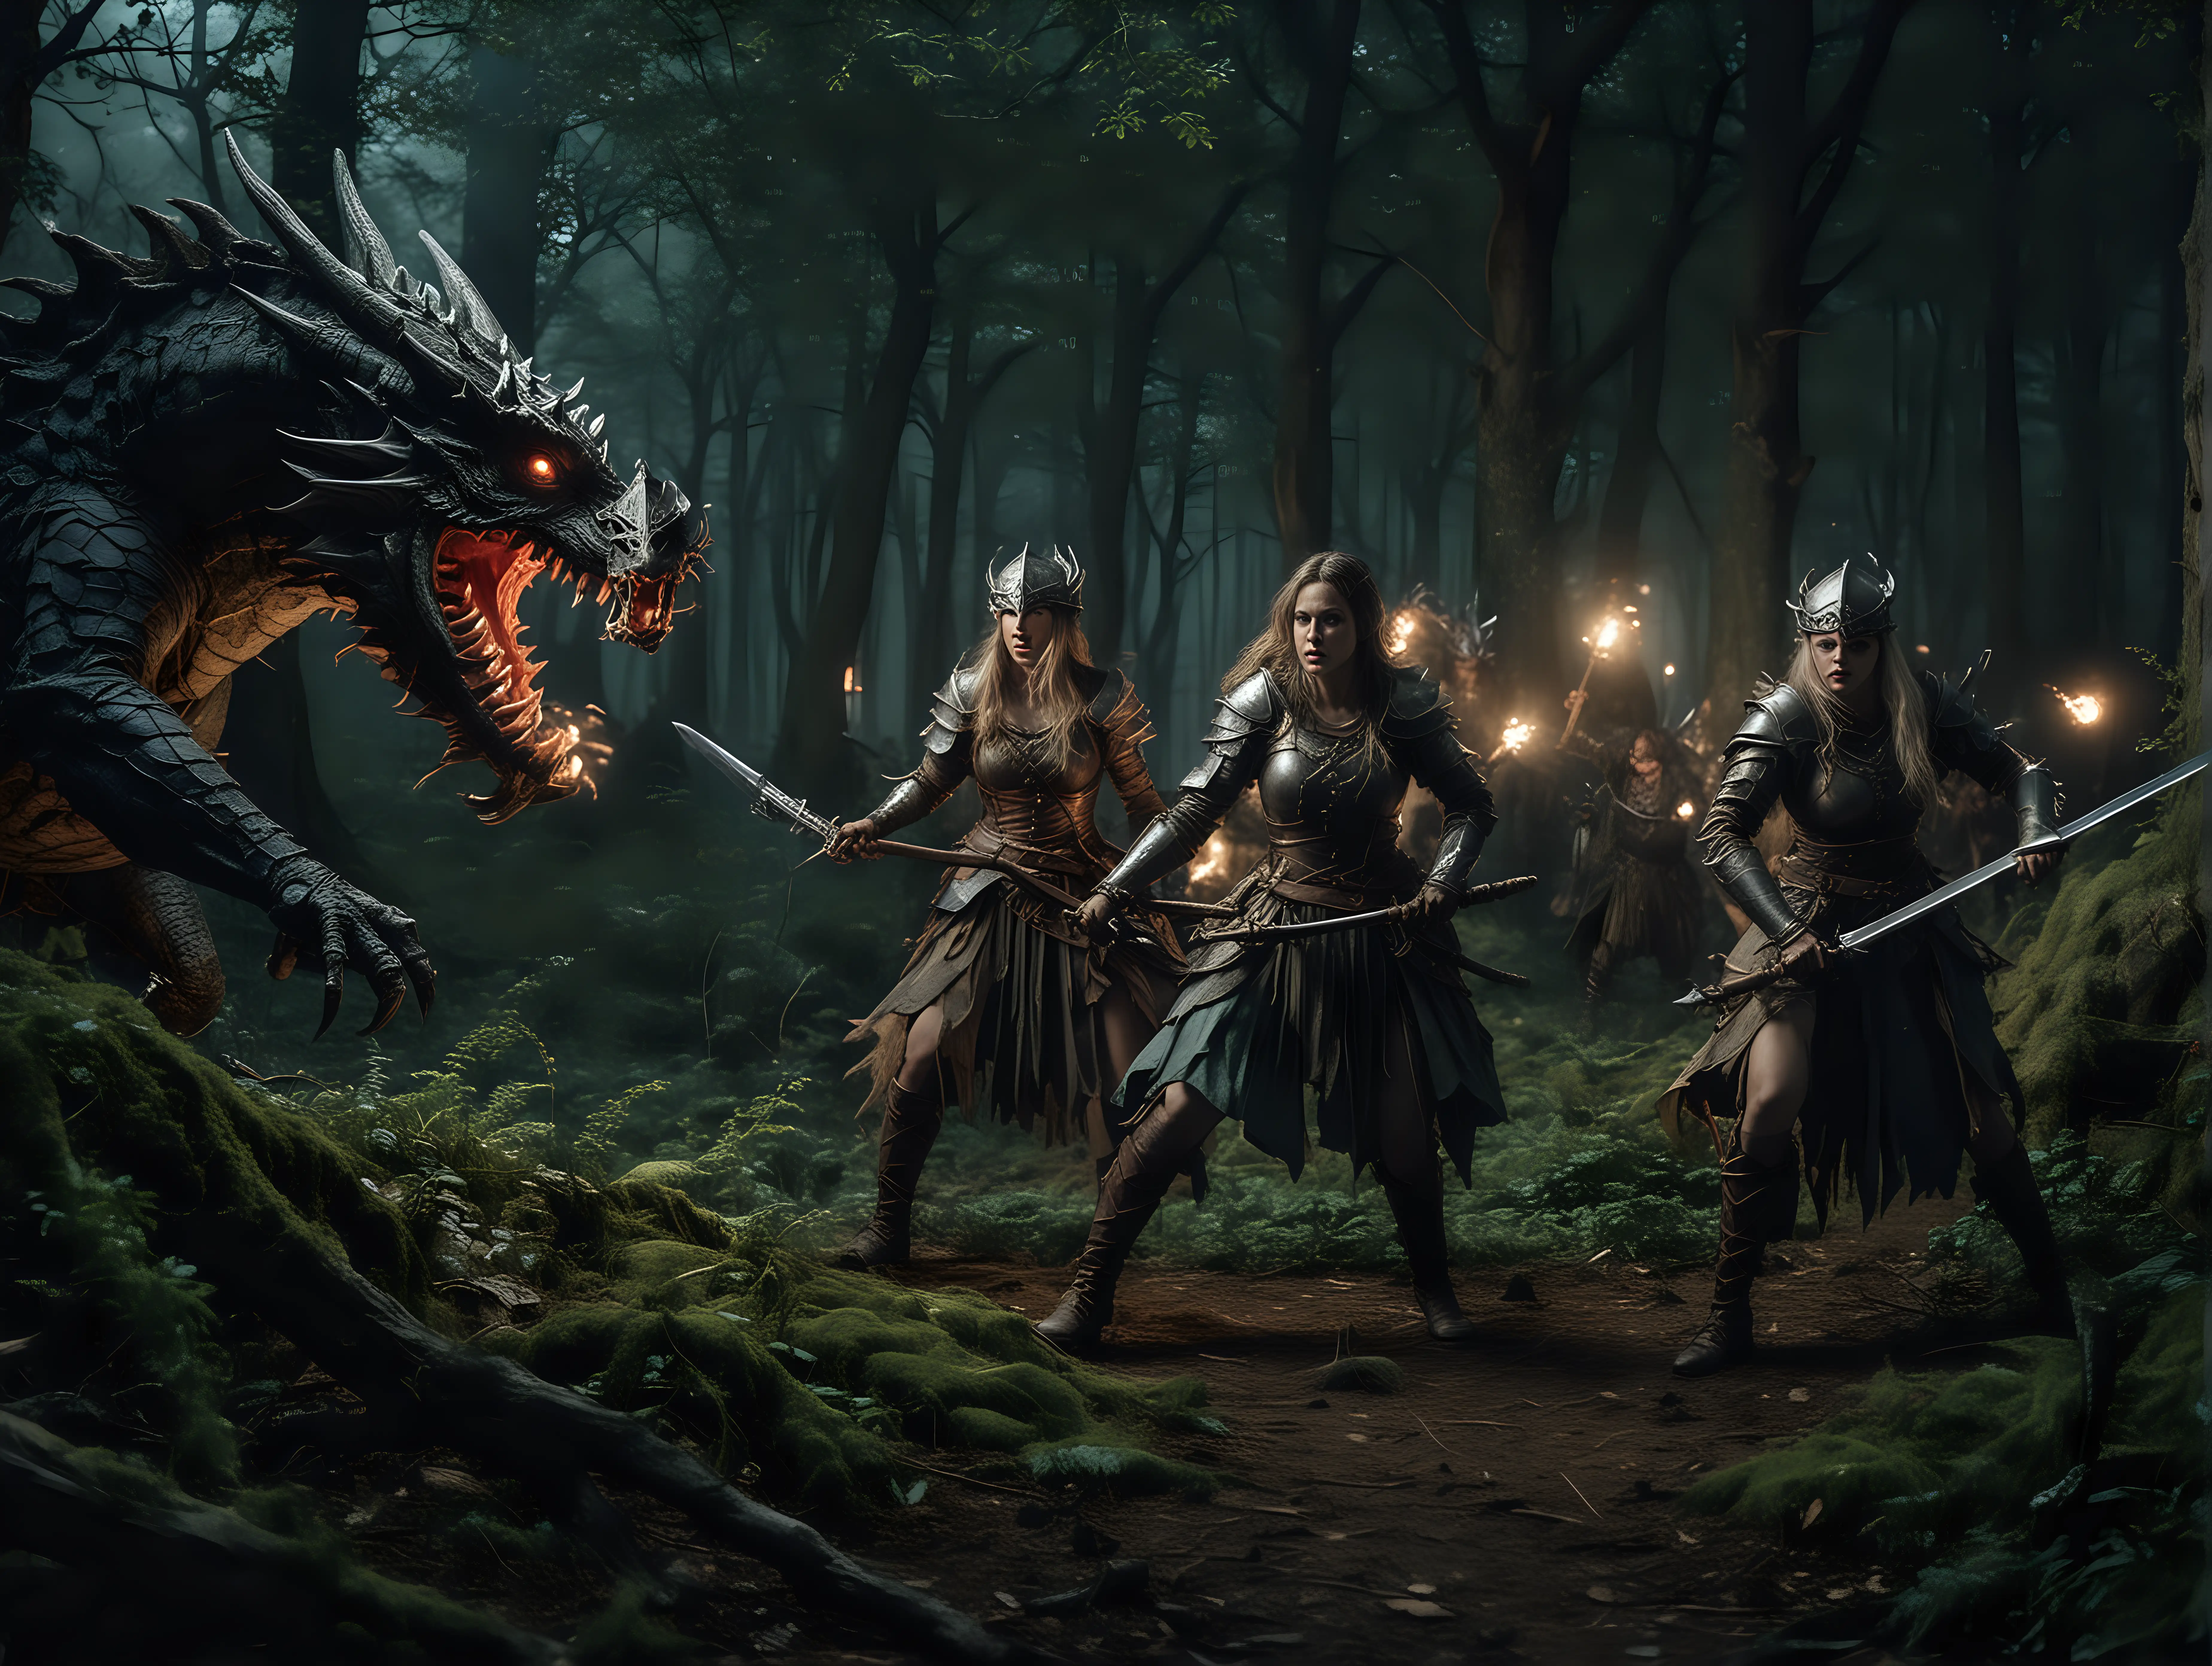 Medieval Female Warriors Battling Trolls and Dragons in Enchanted Forest Night Scene